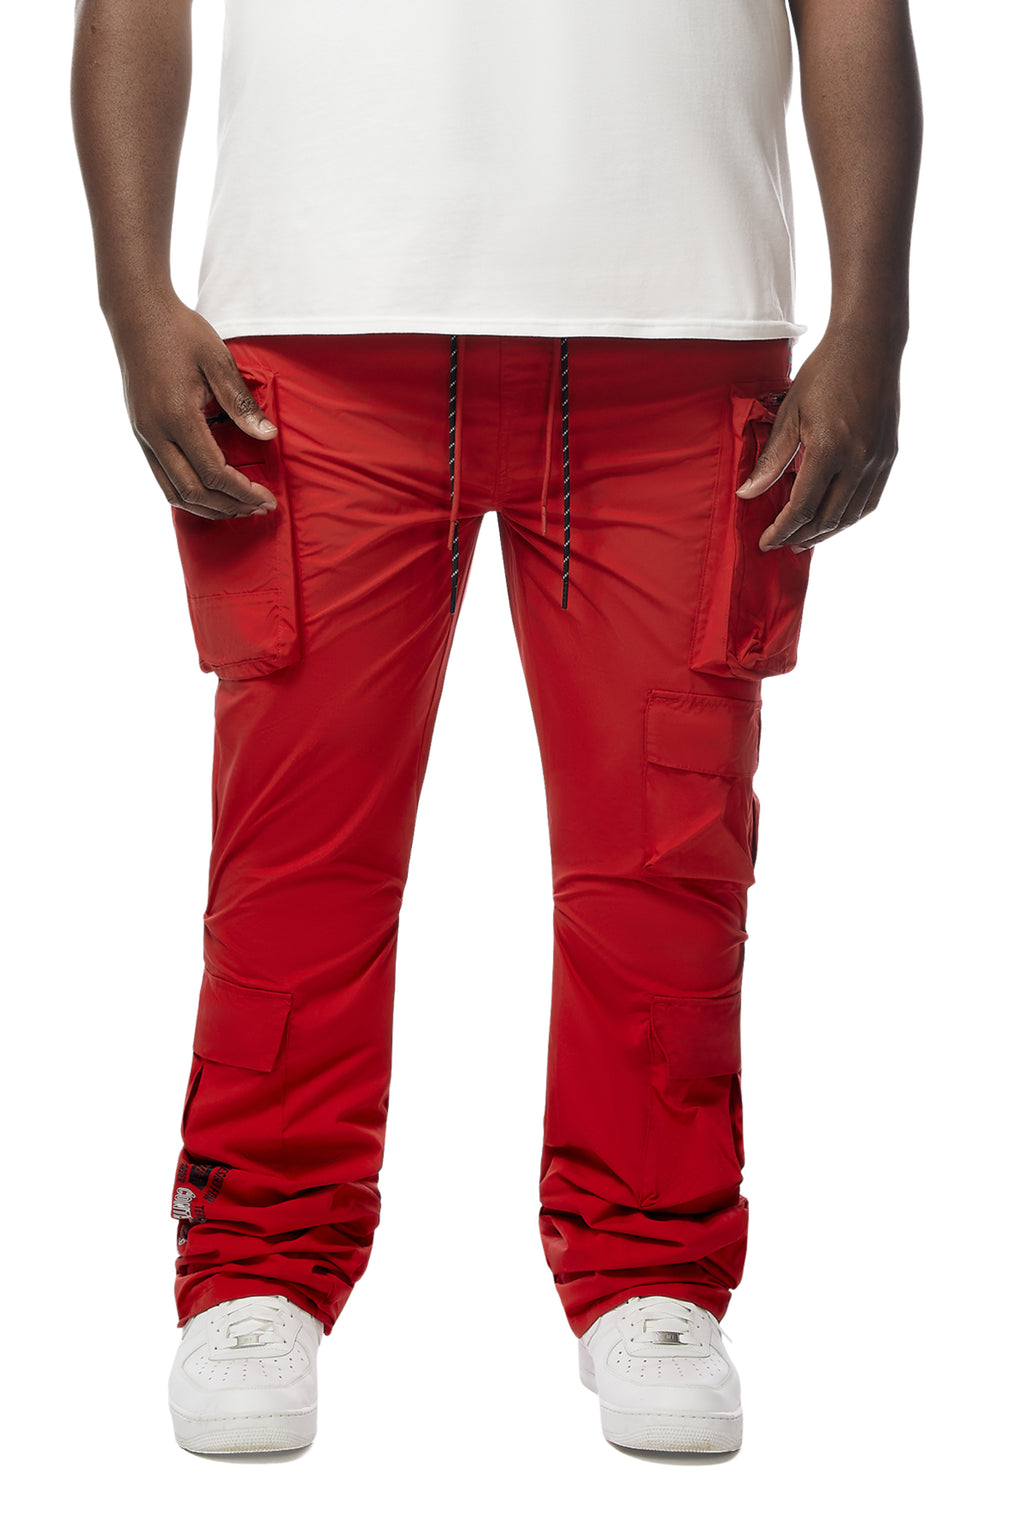 Red Cargo Pants Outfits (5 ideas & outfits) | Lookastic